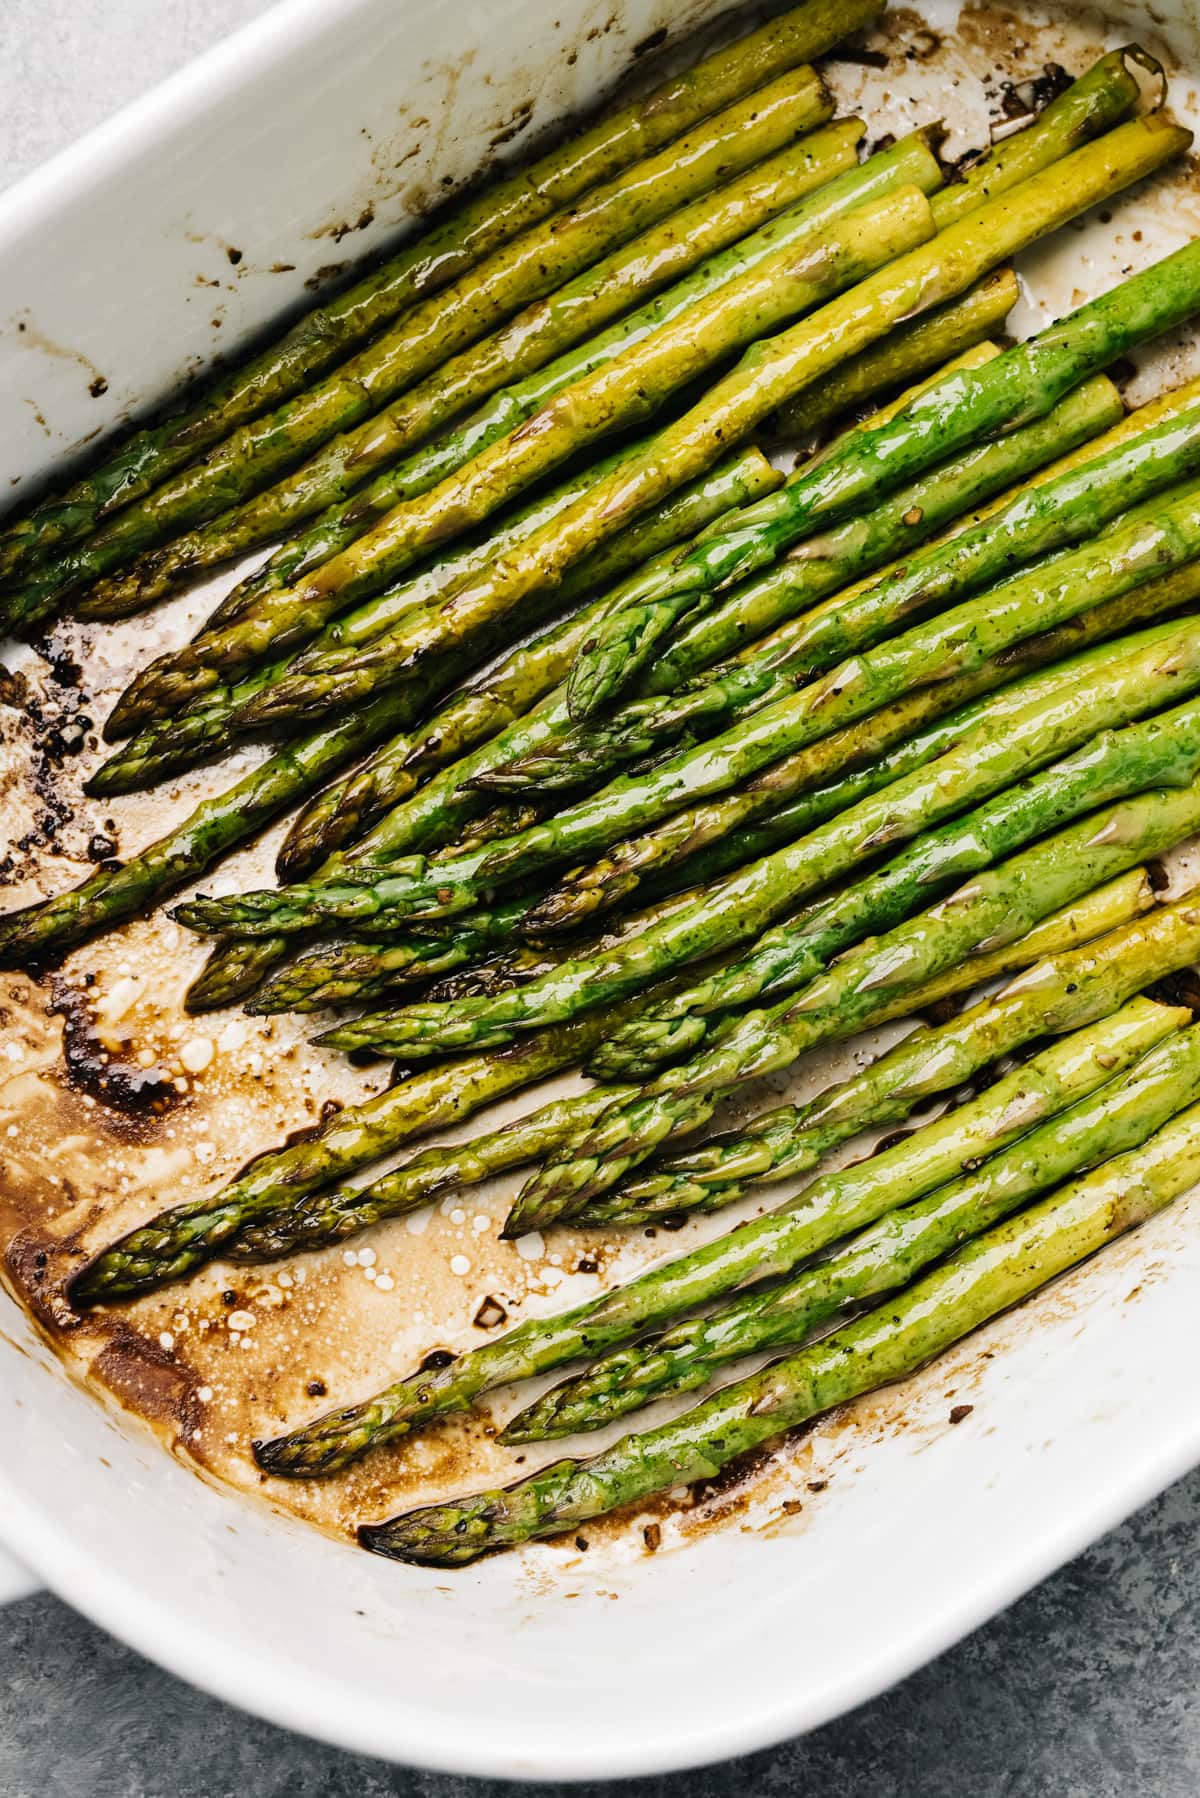 Baked asparagus spears with balsamic vinegar in a white casserole dish.